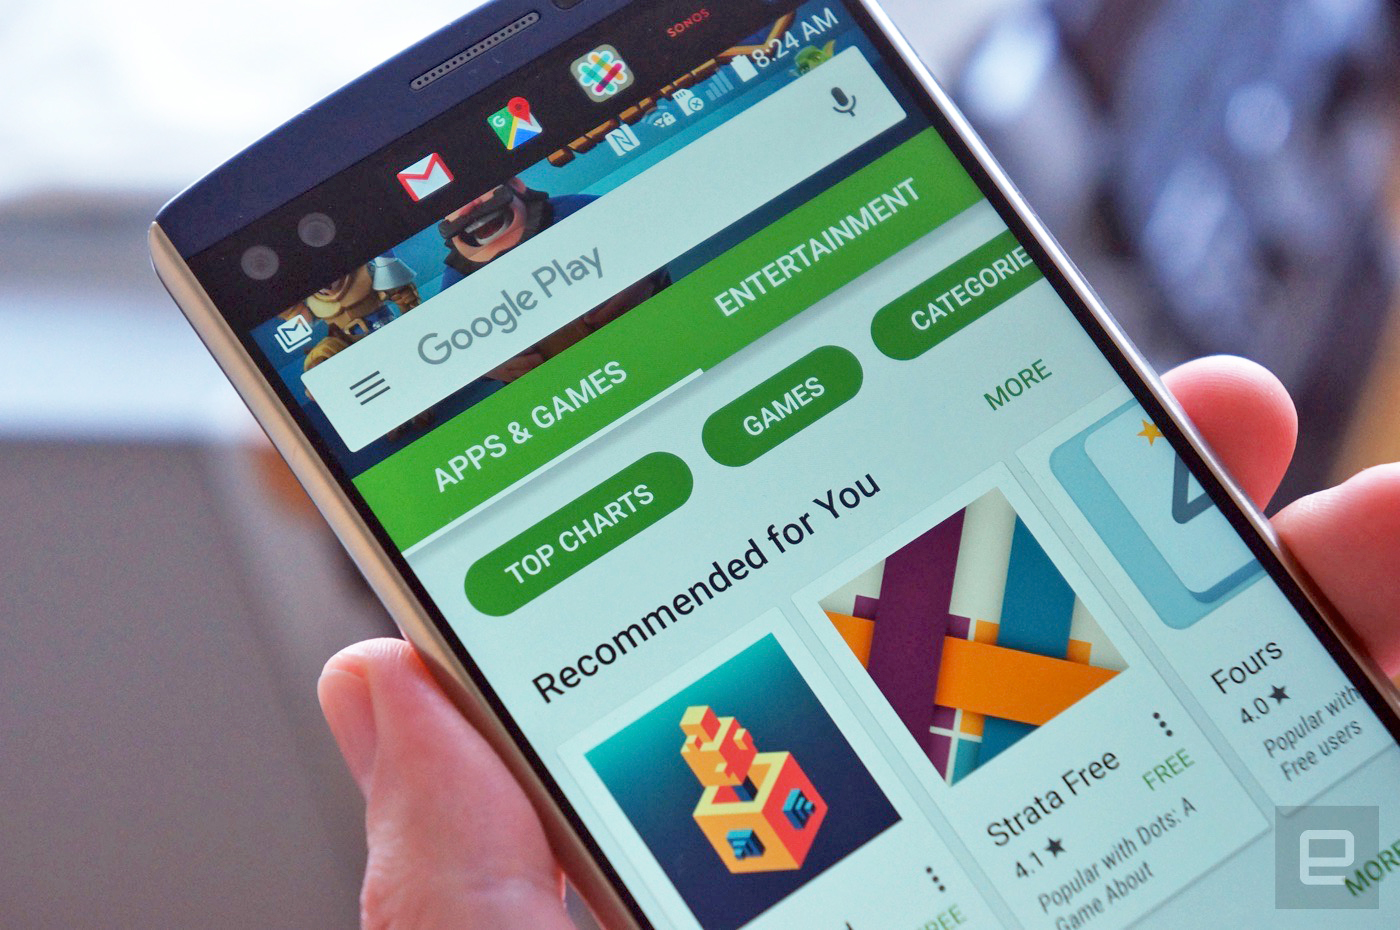 Google wants make it easier to craft apps that go big